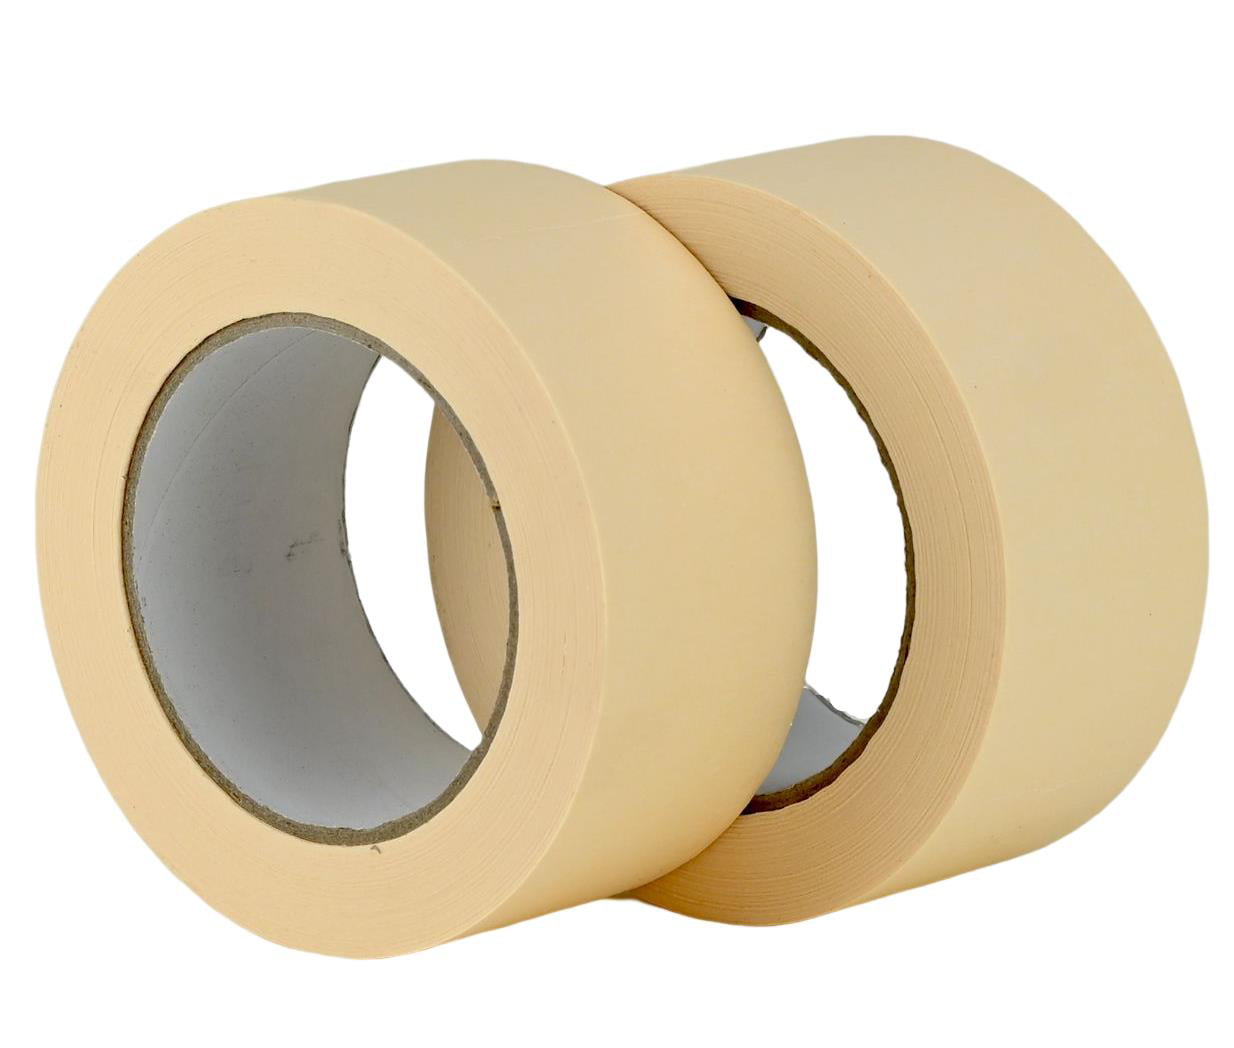 STADEA 2 Inch Wide White Masking Tape General Purpose Multi Surface Roll